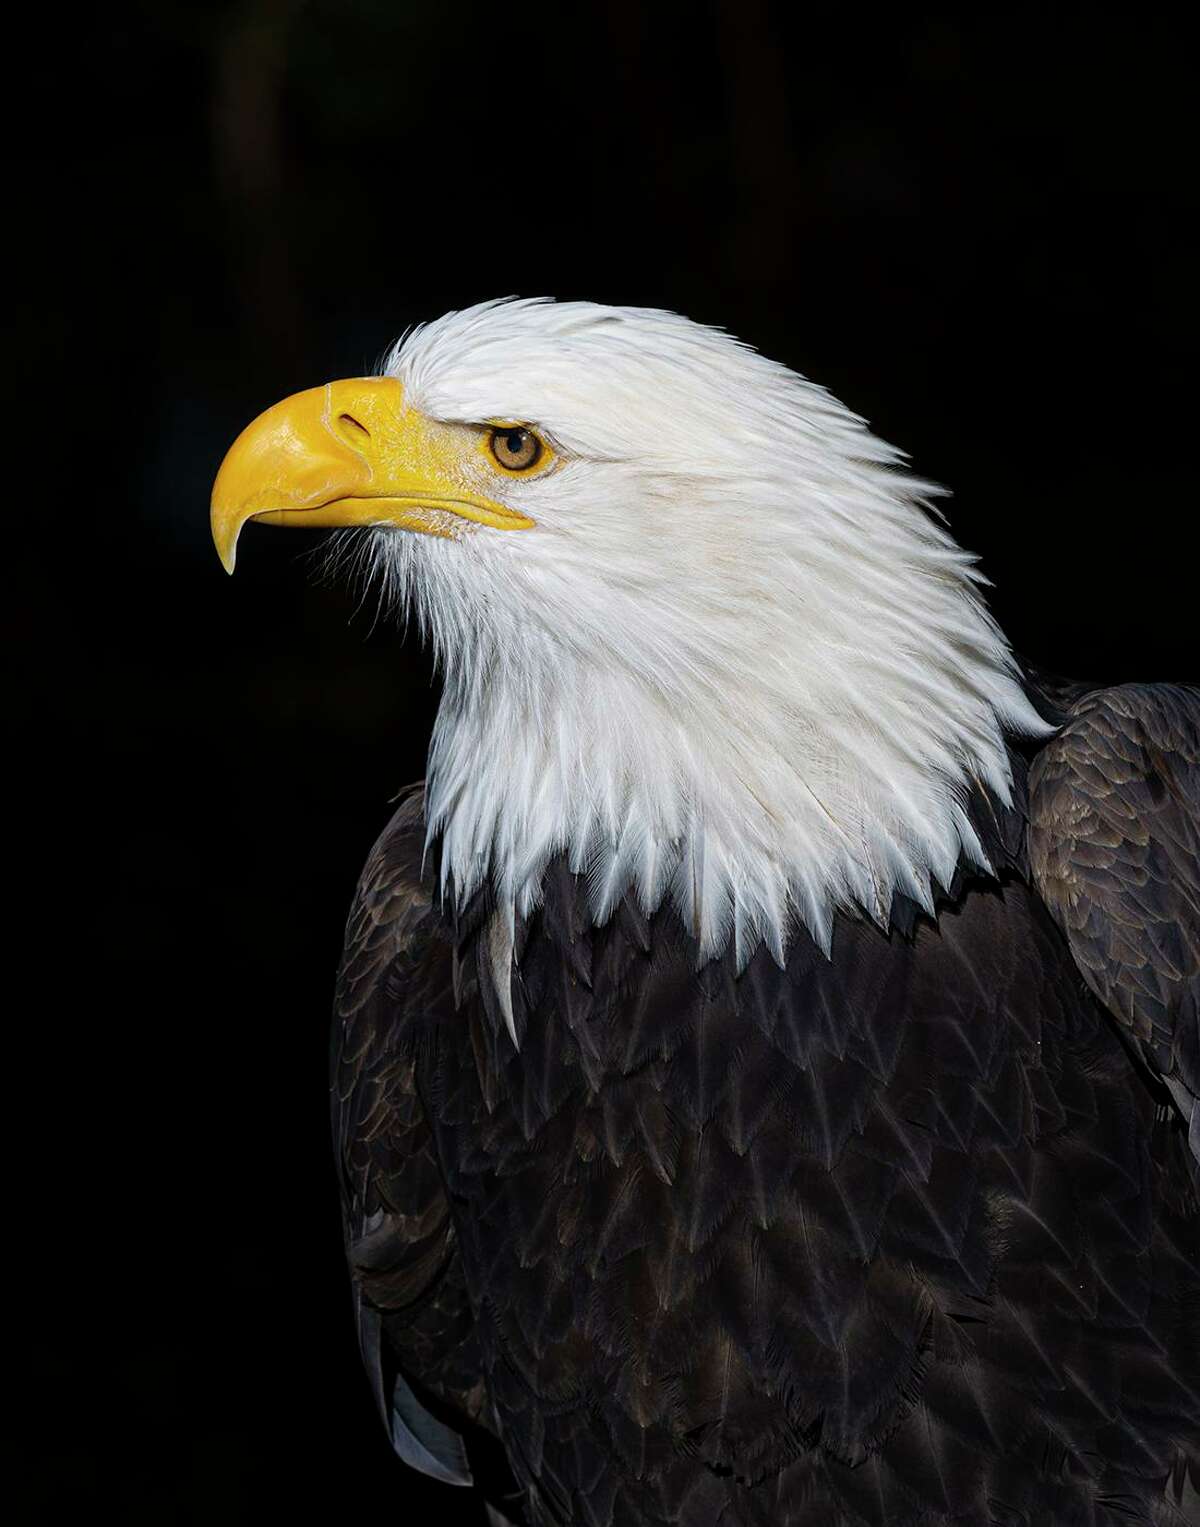 The bald eagle has been on the Great Seal of the United States since 1782. Photo Credit: Kathy Adams Clark. Restricted use.